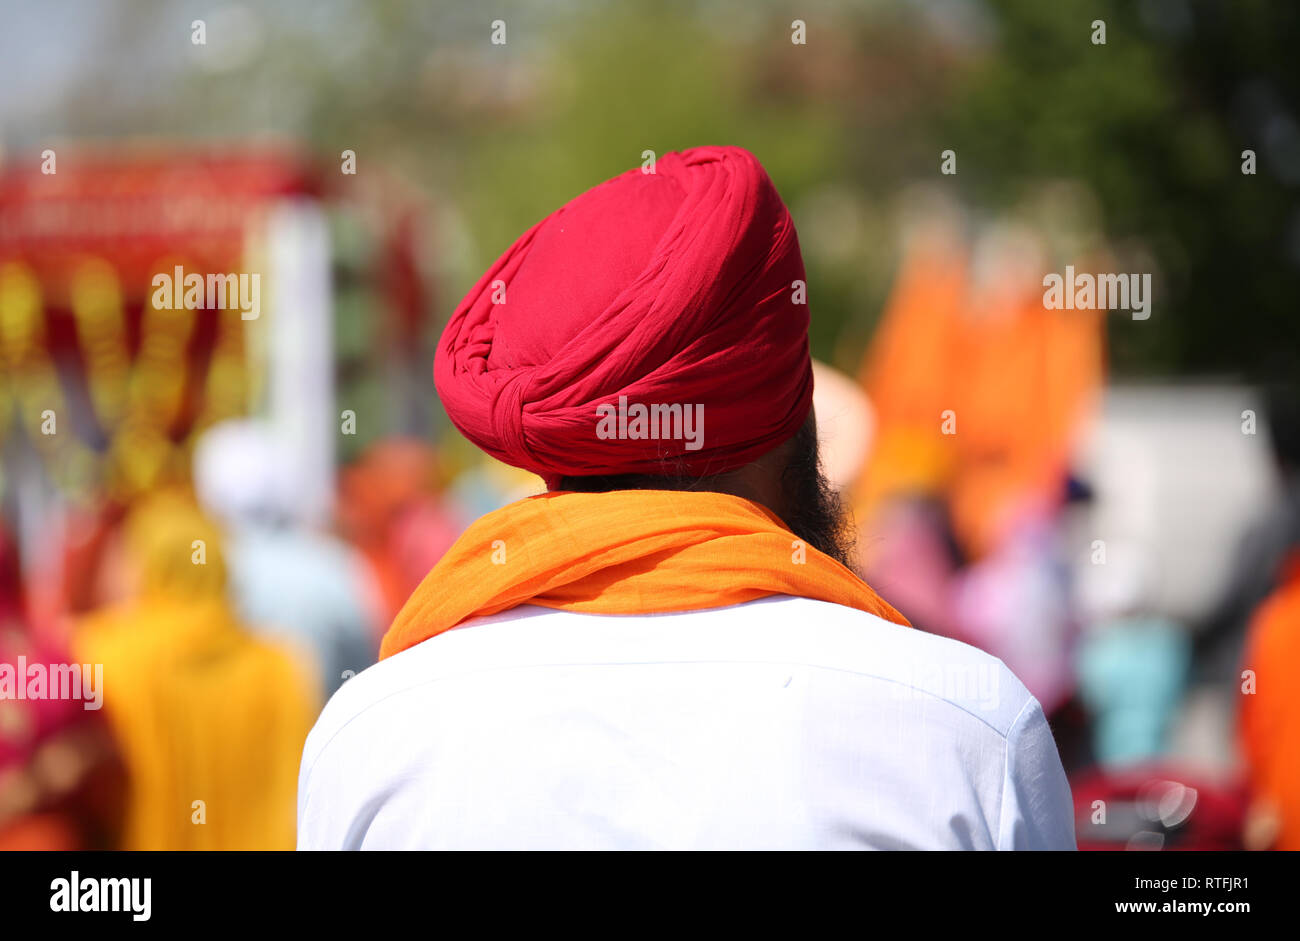 indian man with red turban and white shirt Stock Photo